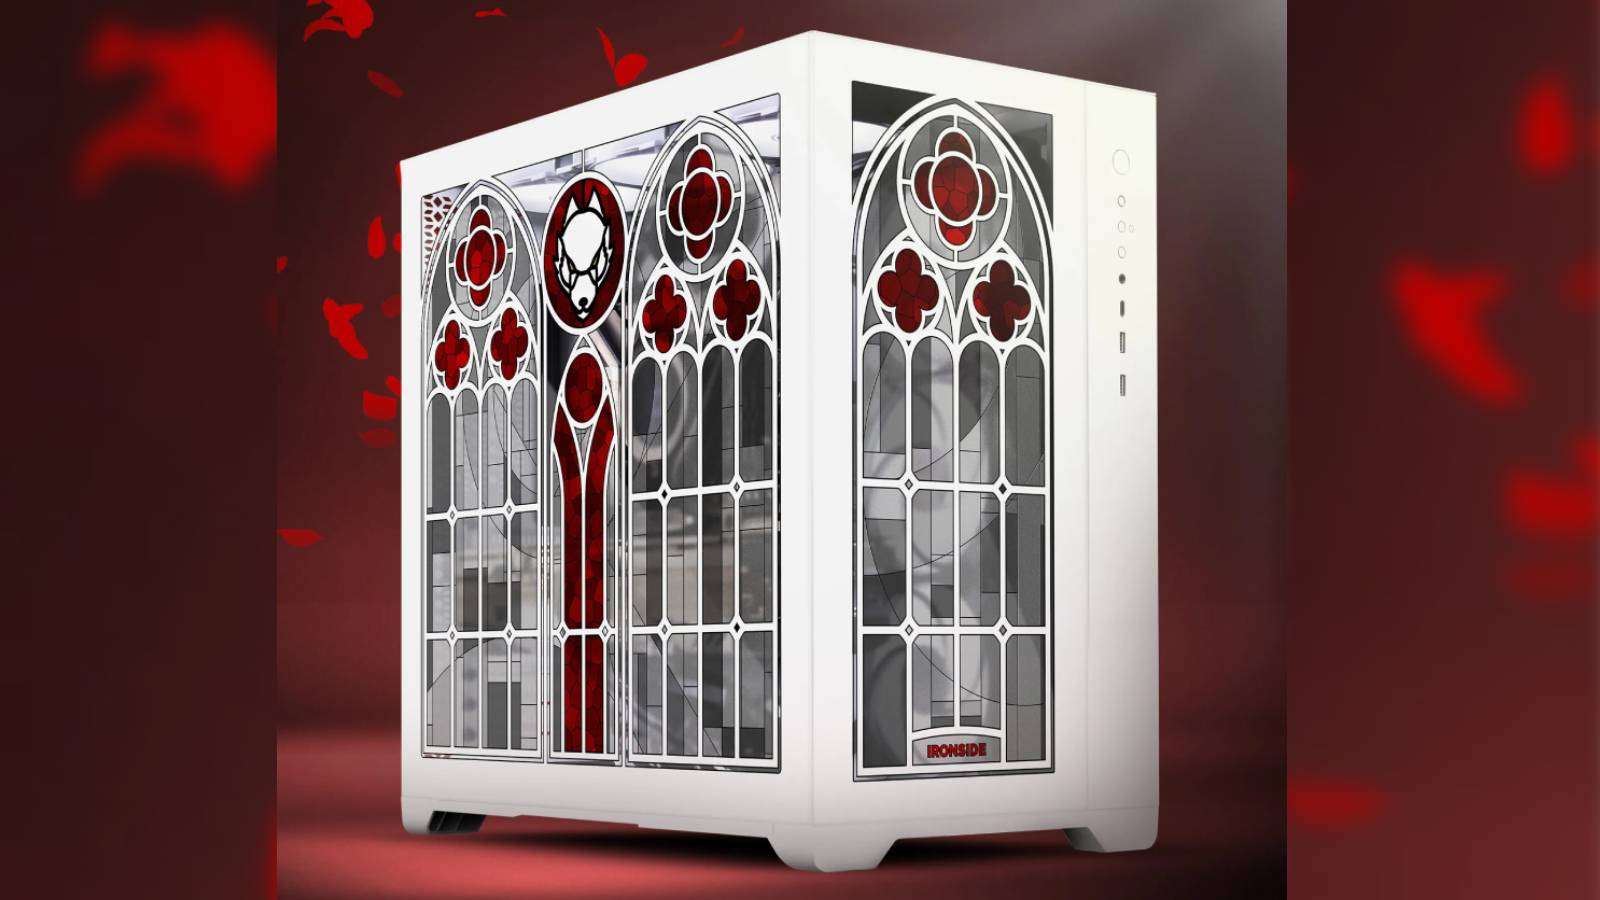 Image of the Lord Aethelstan White Wold edition PC case by Ironside.